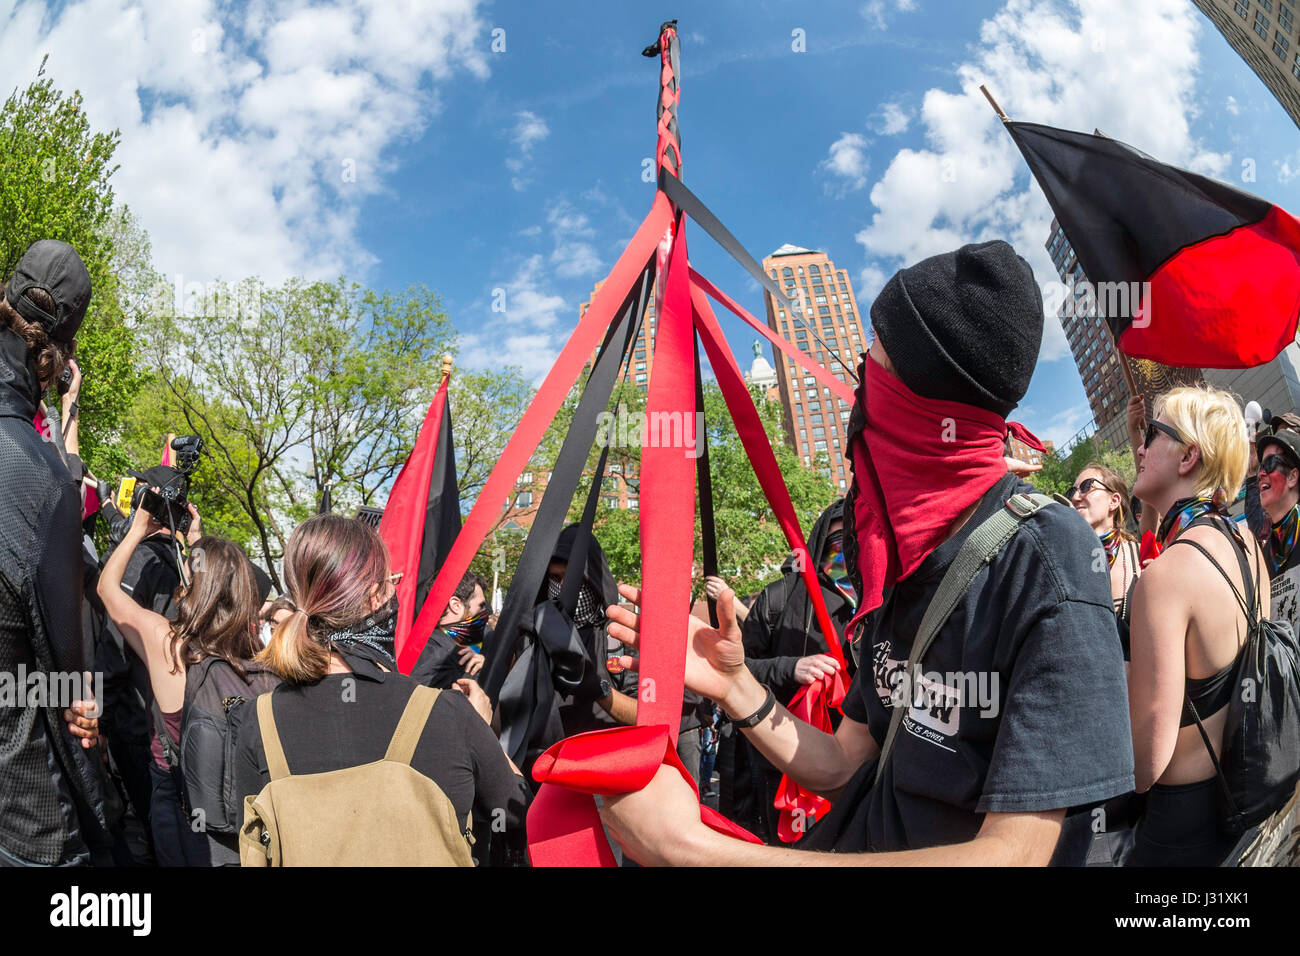 New York, USA. 01st May, 2017. New York, NY 1 May 2017 - Anarchists dance around a Maypole at a May Day/International Workers Day rally in Union Square Park. Credit: Stacy Walsh Rosenstock/Alamy Live News Stock Photo